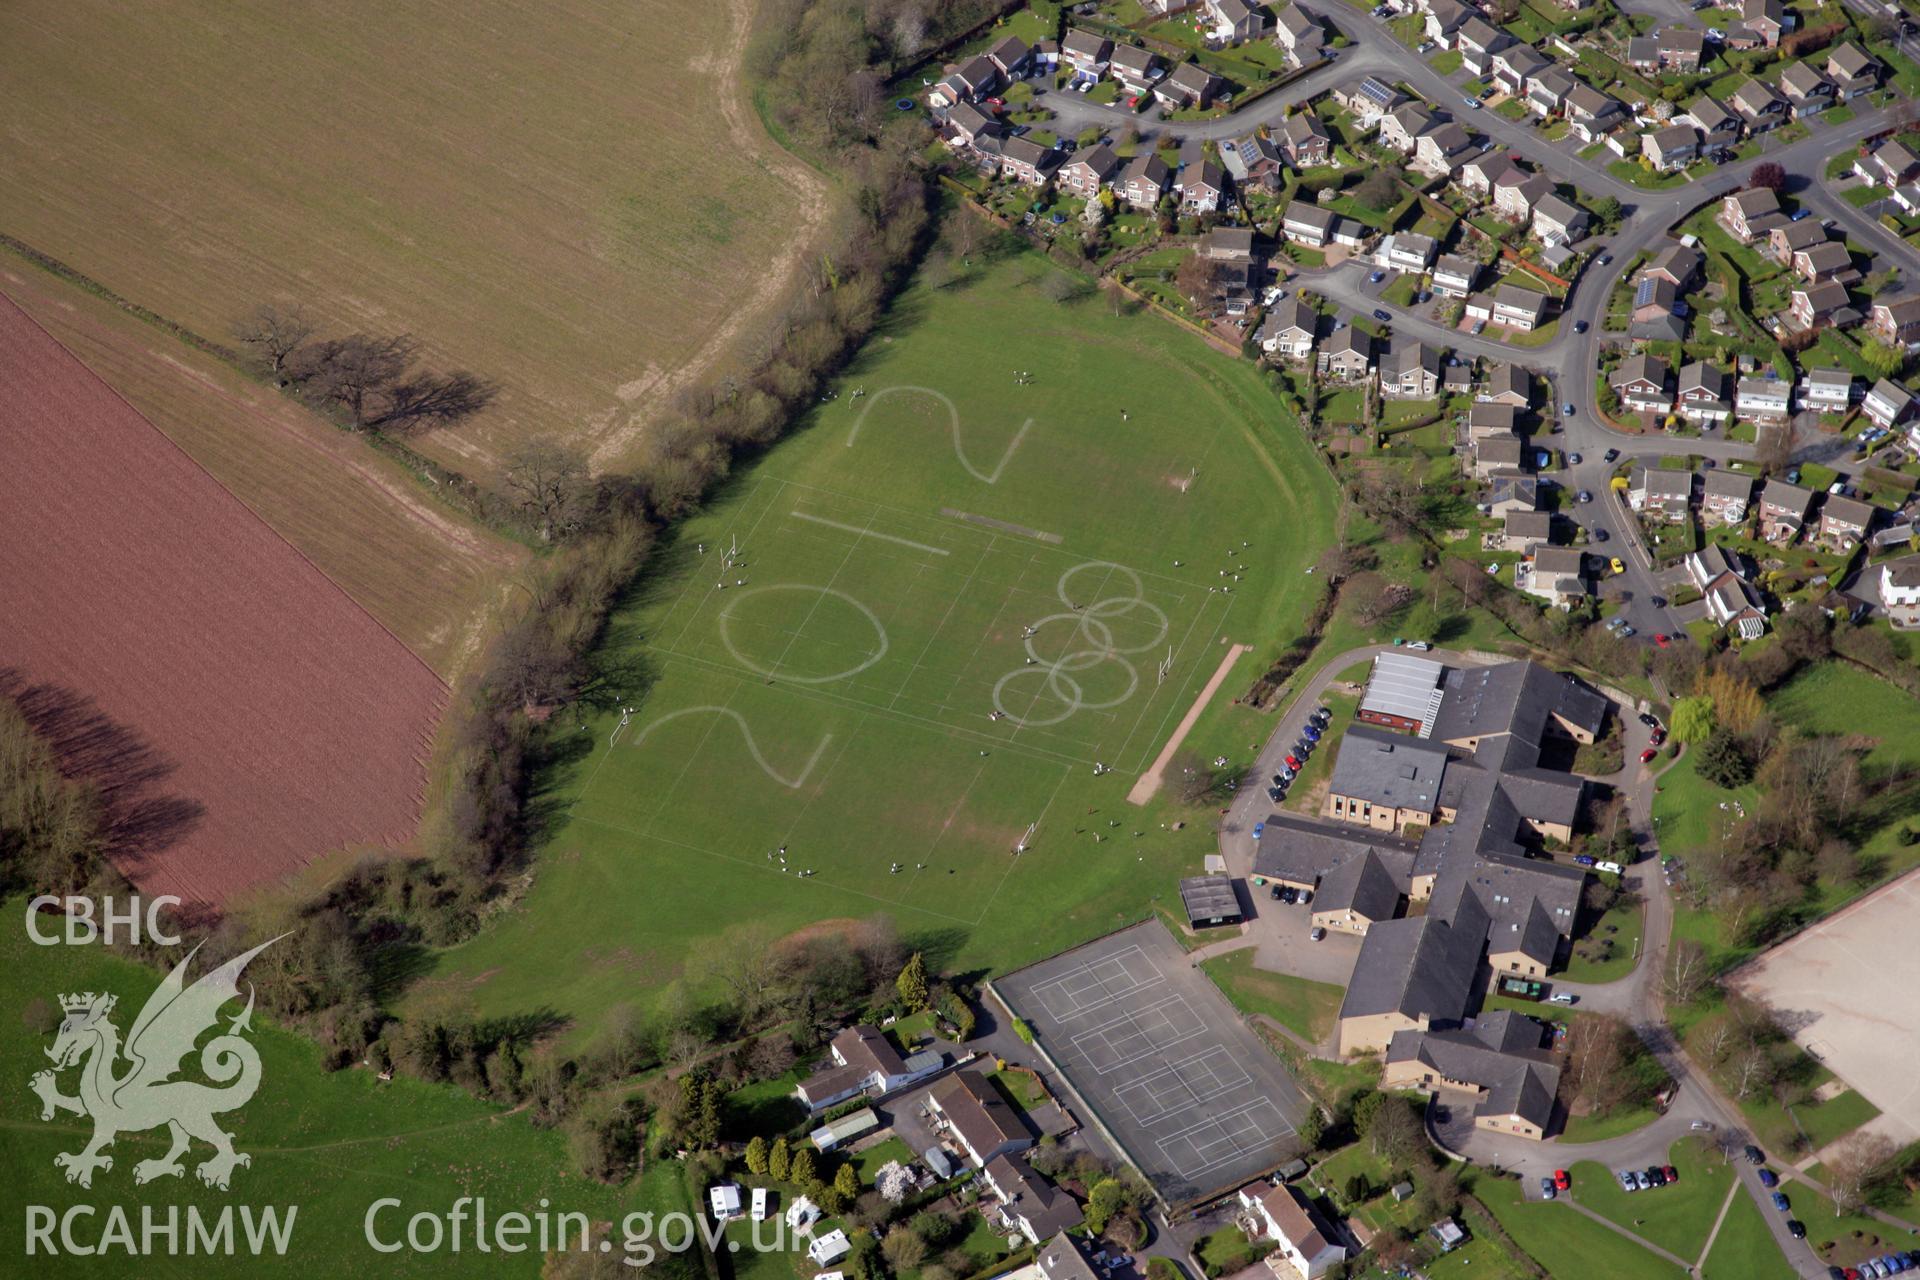 RCAHMW colour oblique photograph of Crickhowell High School, '2012' Olympic art in playing field. Taken by Toby Driver and Oliver Davies on 28/03/2012.